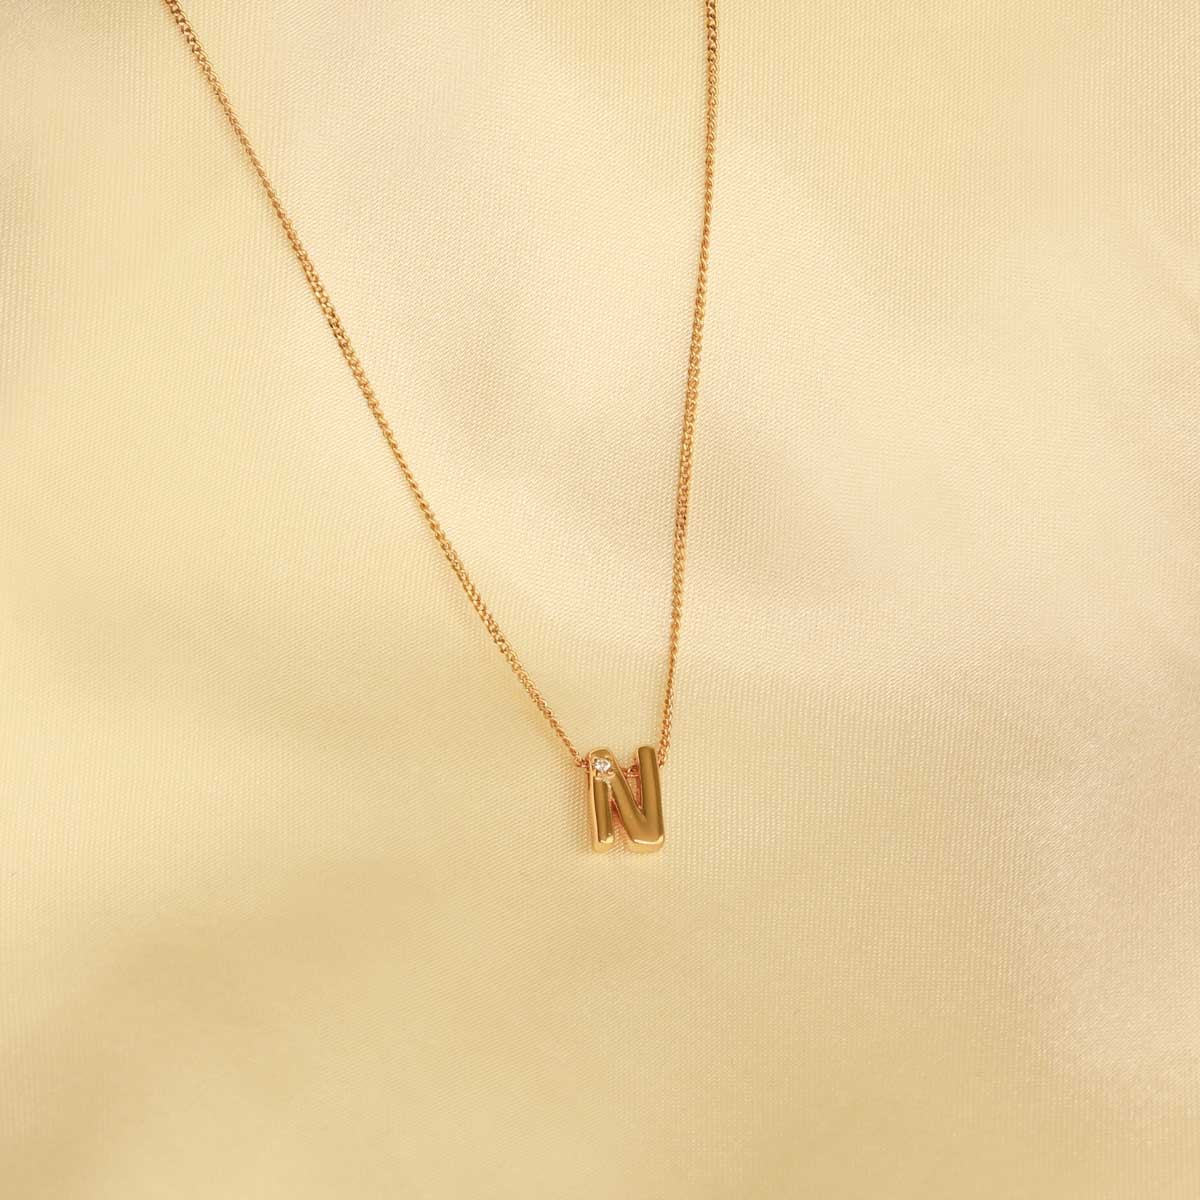 N Gold Initial Pendant Necklace